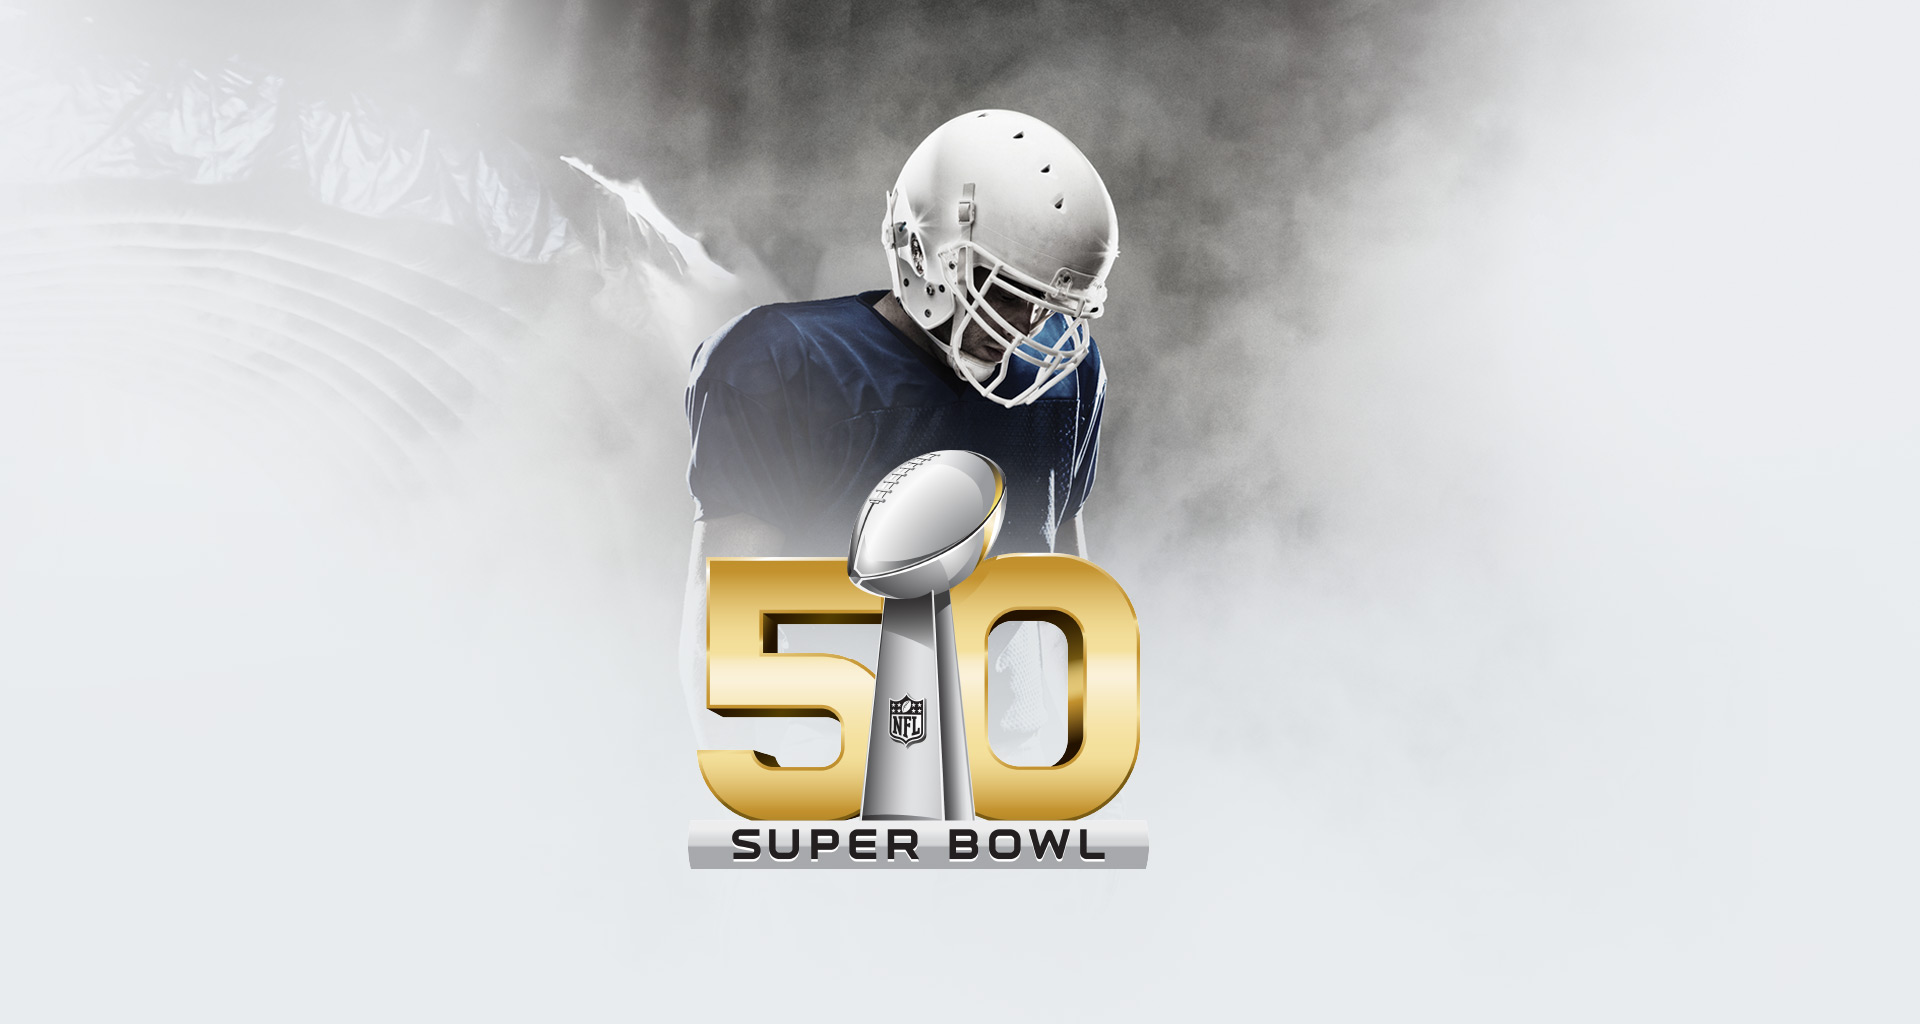 Super Bowl 50 Aspers at The Gate Newcastle The Best UK Casinos 1920x1024